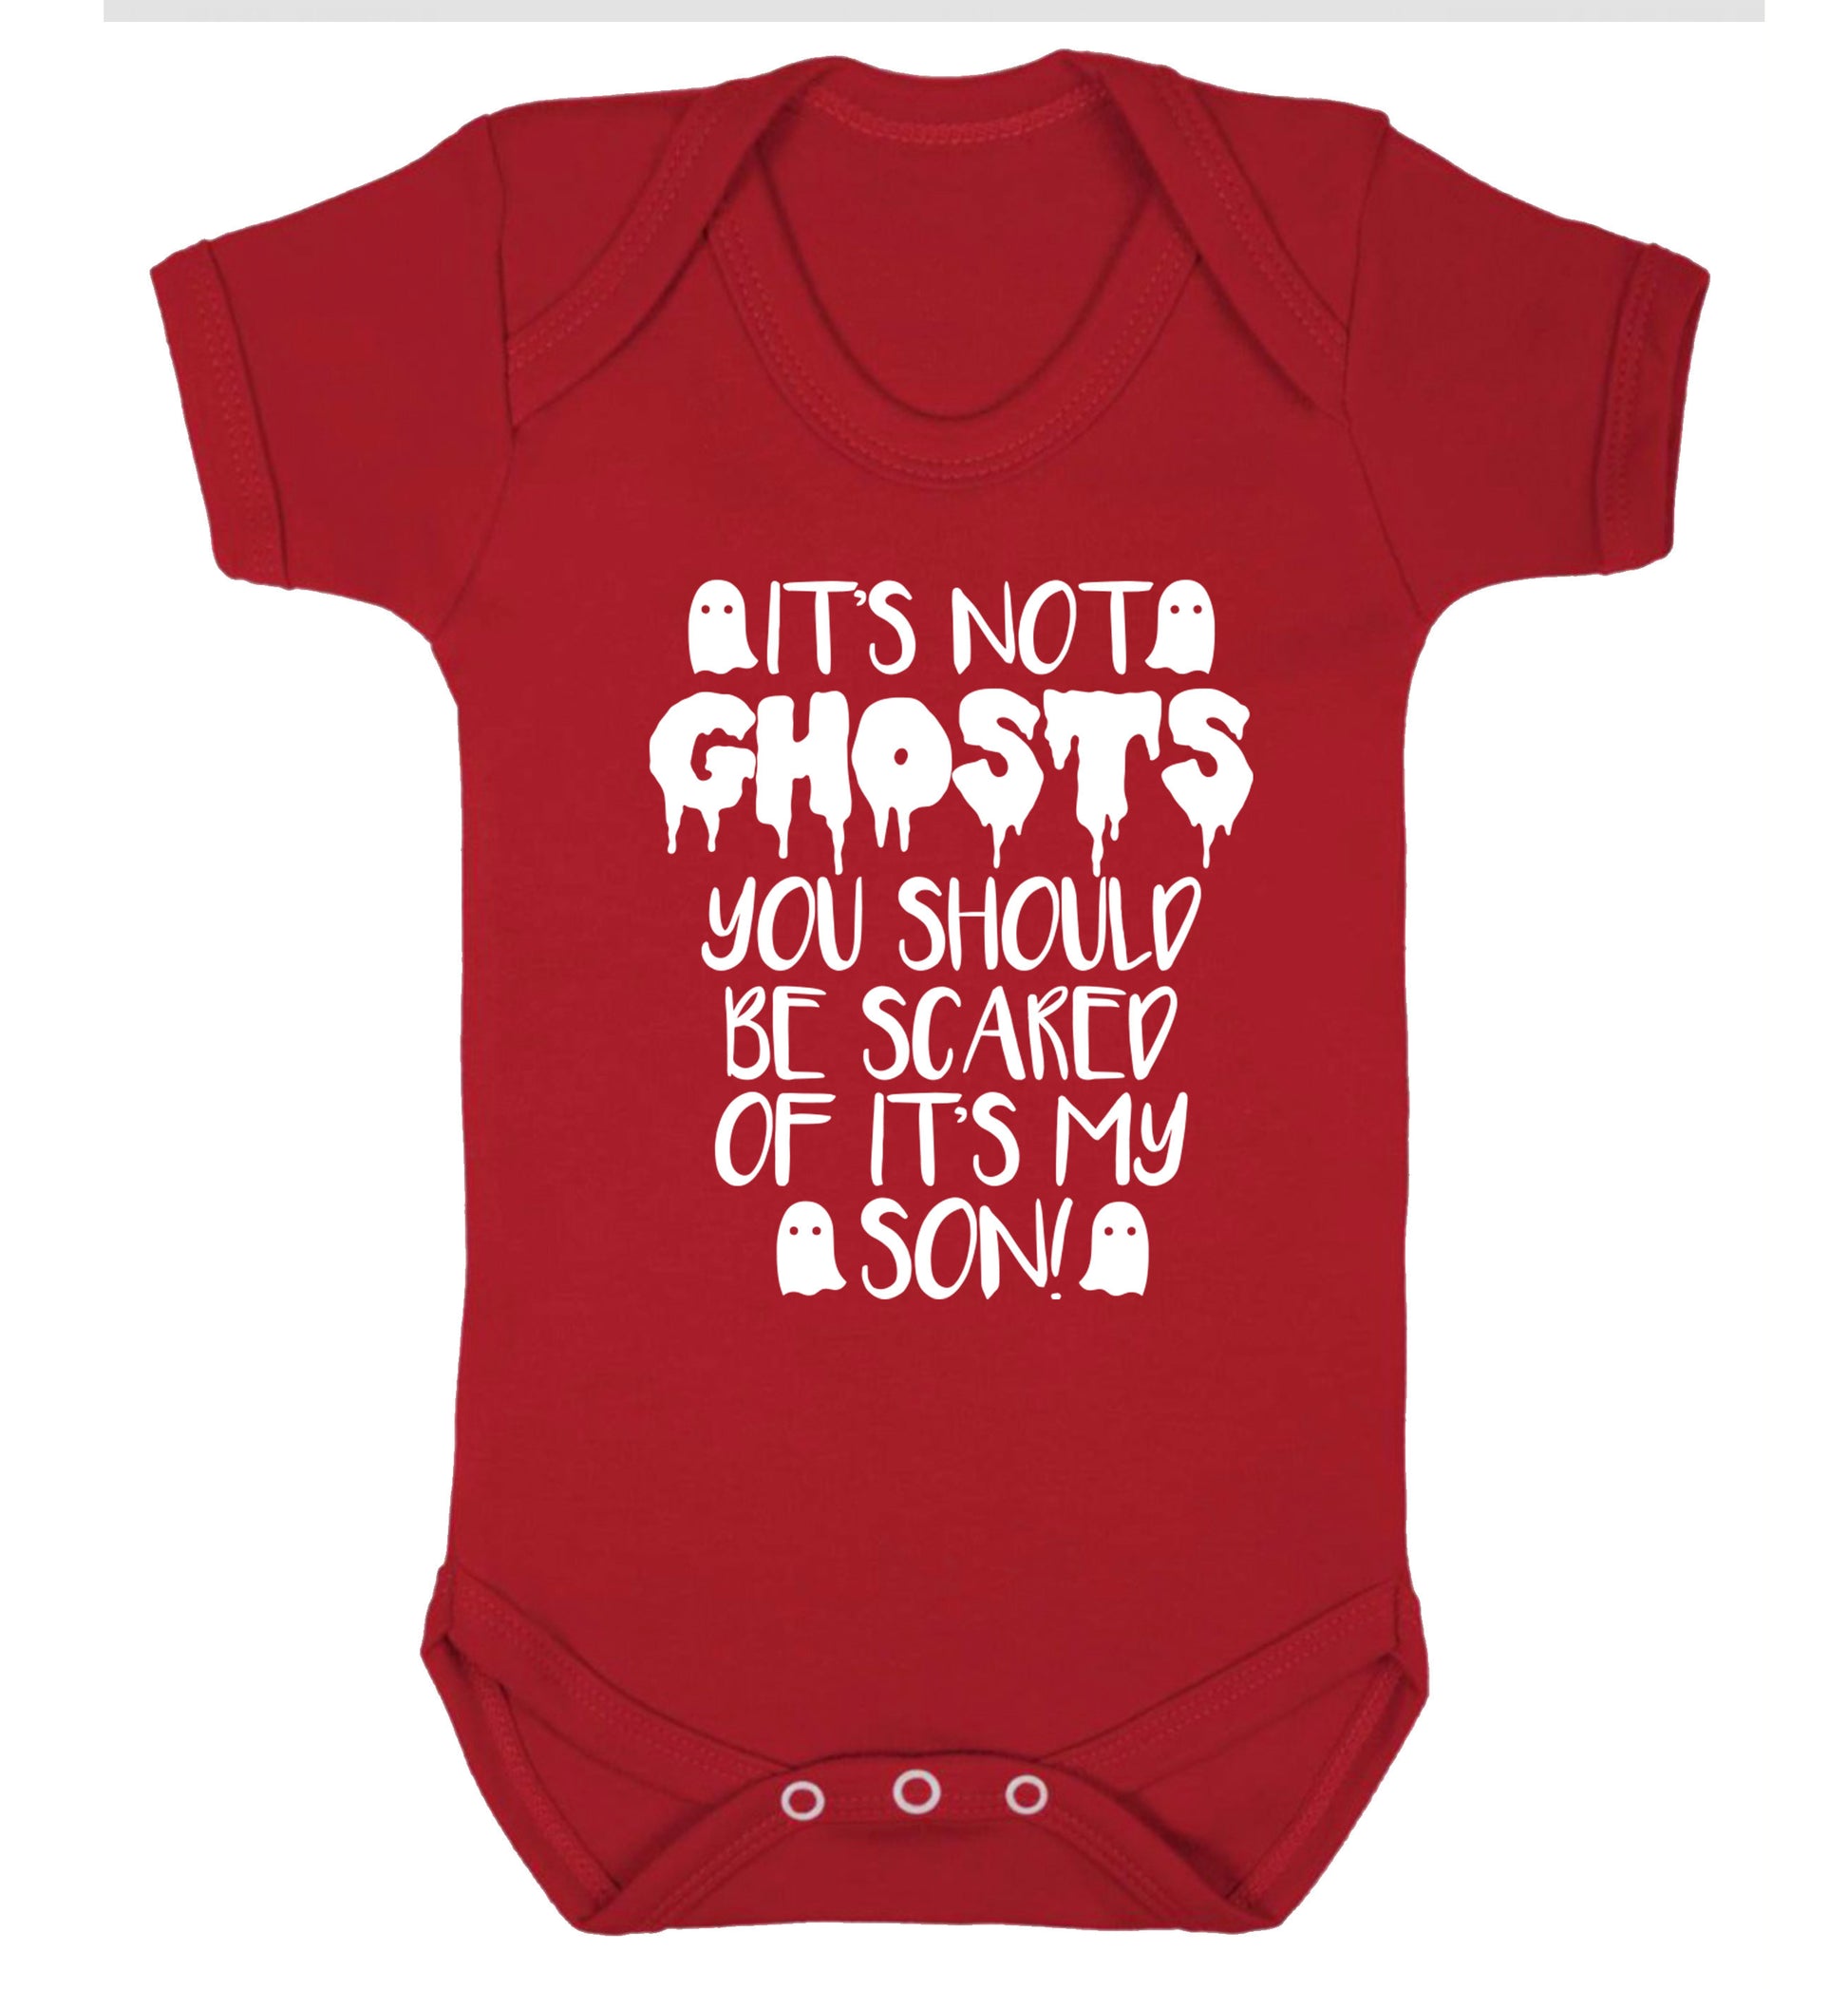 It's not ghosts you should be scared of it's my son! Baby Vest red 18-24 months